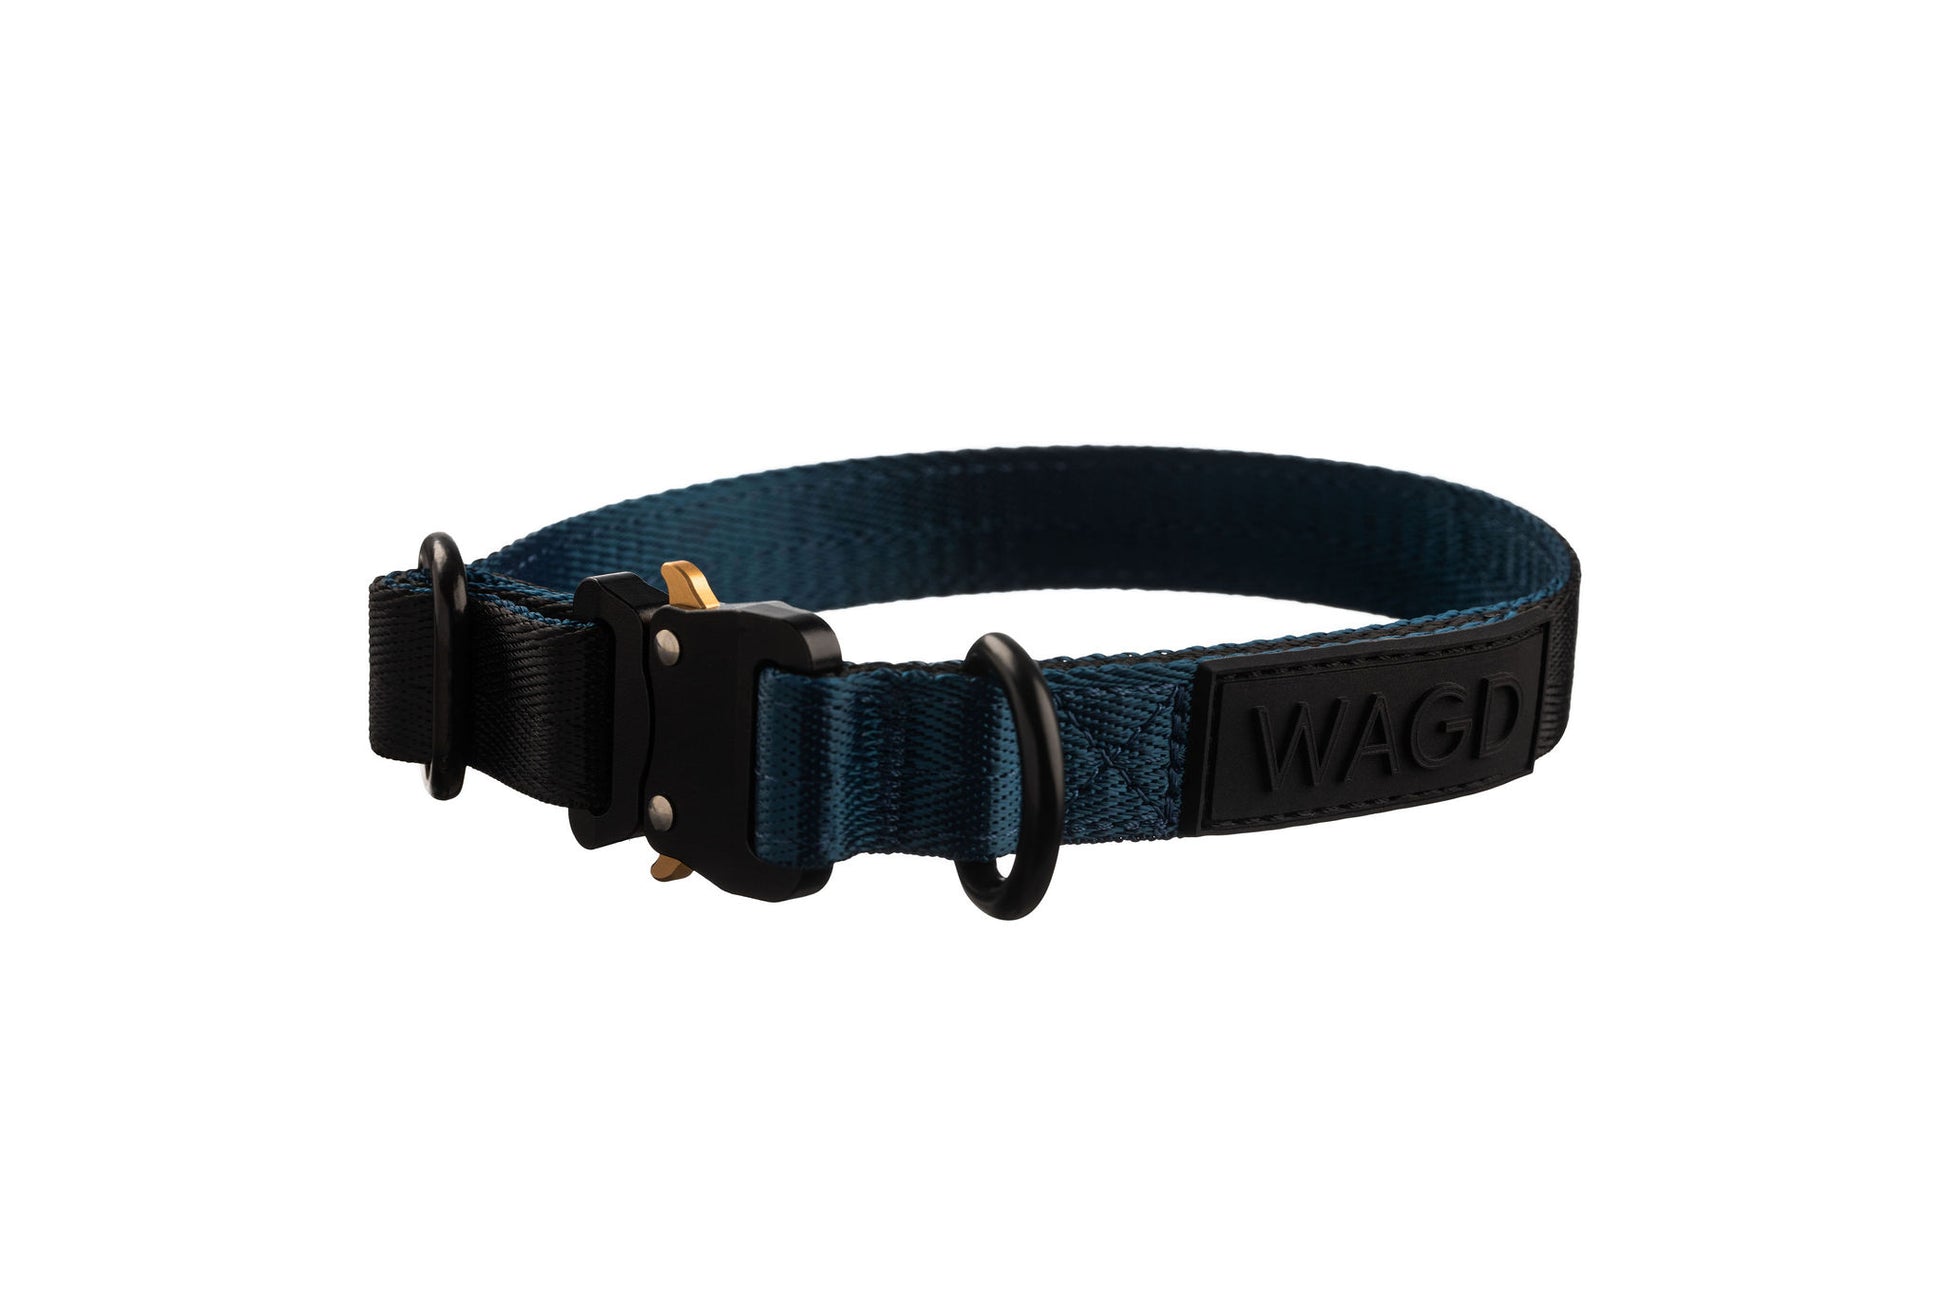 Dog collar in peacock and black with black clip and d-ring in black. With WAGD Black rubber logo.